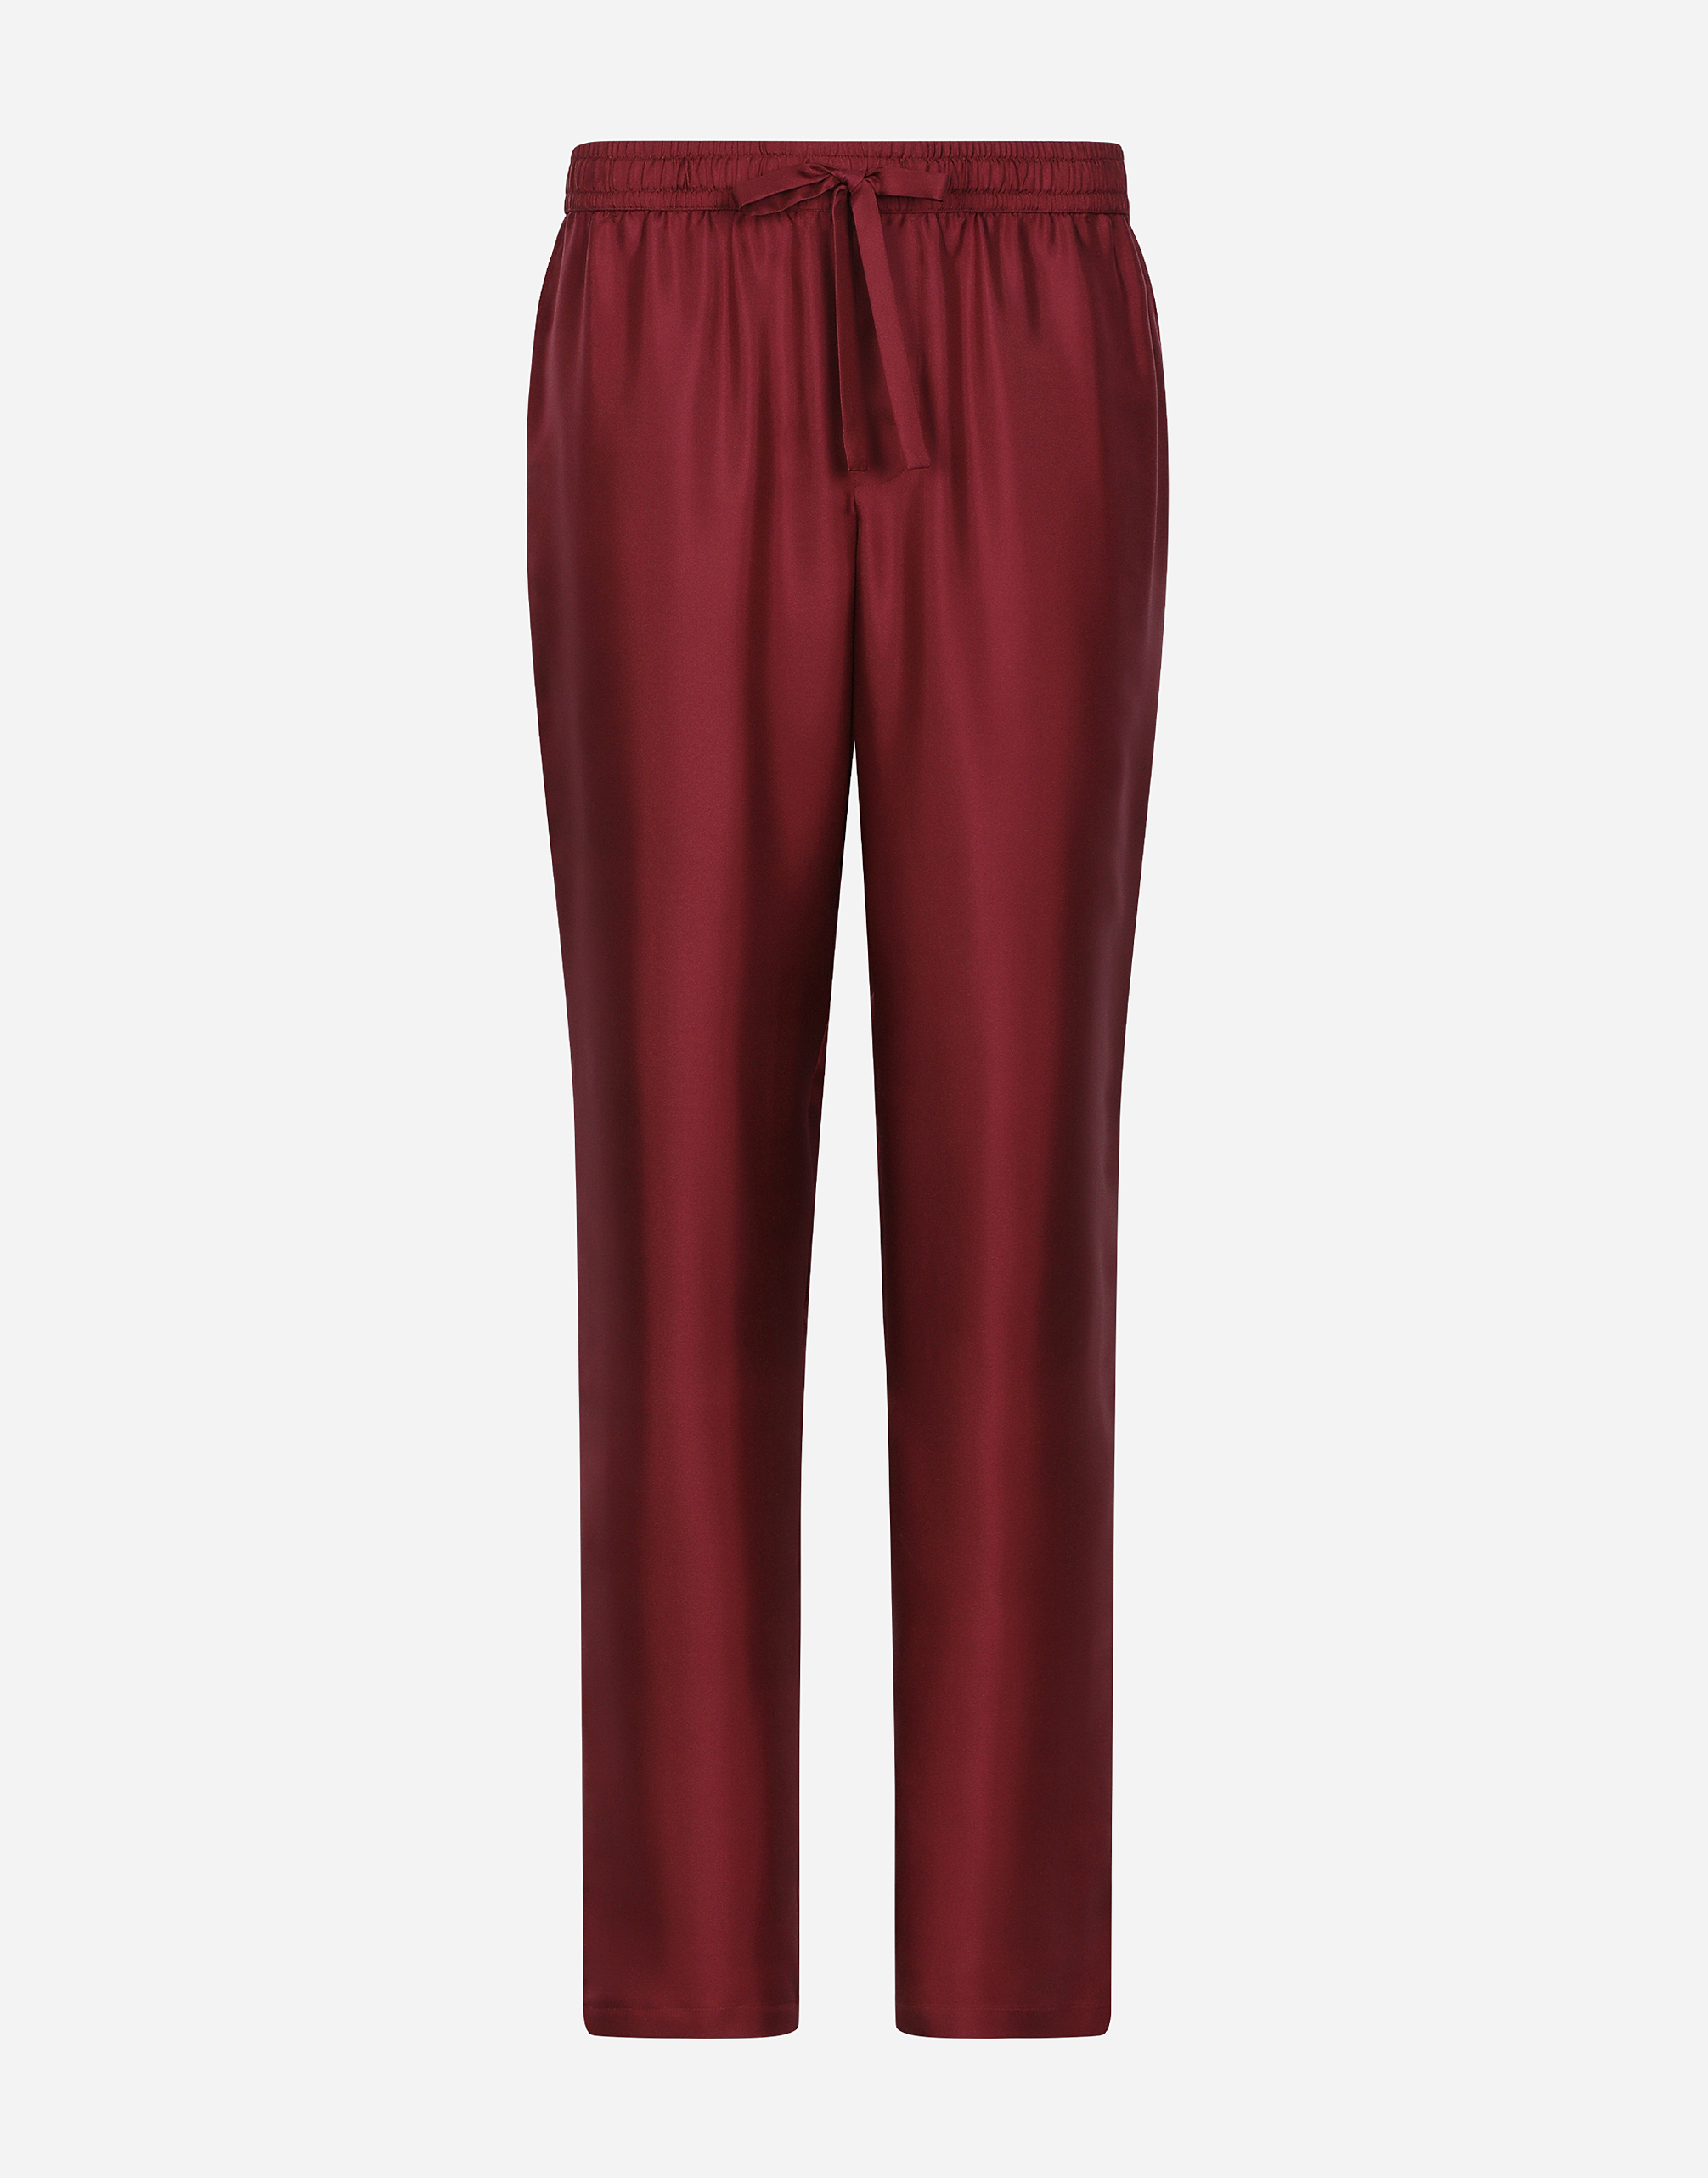 Silk jogging pants with DG embroidered patch in Bordeaux